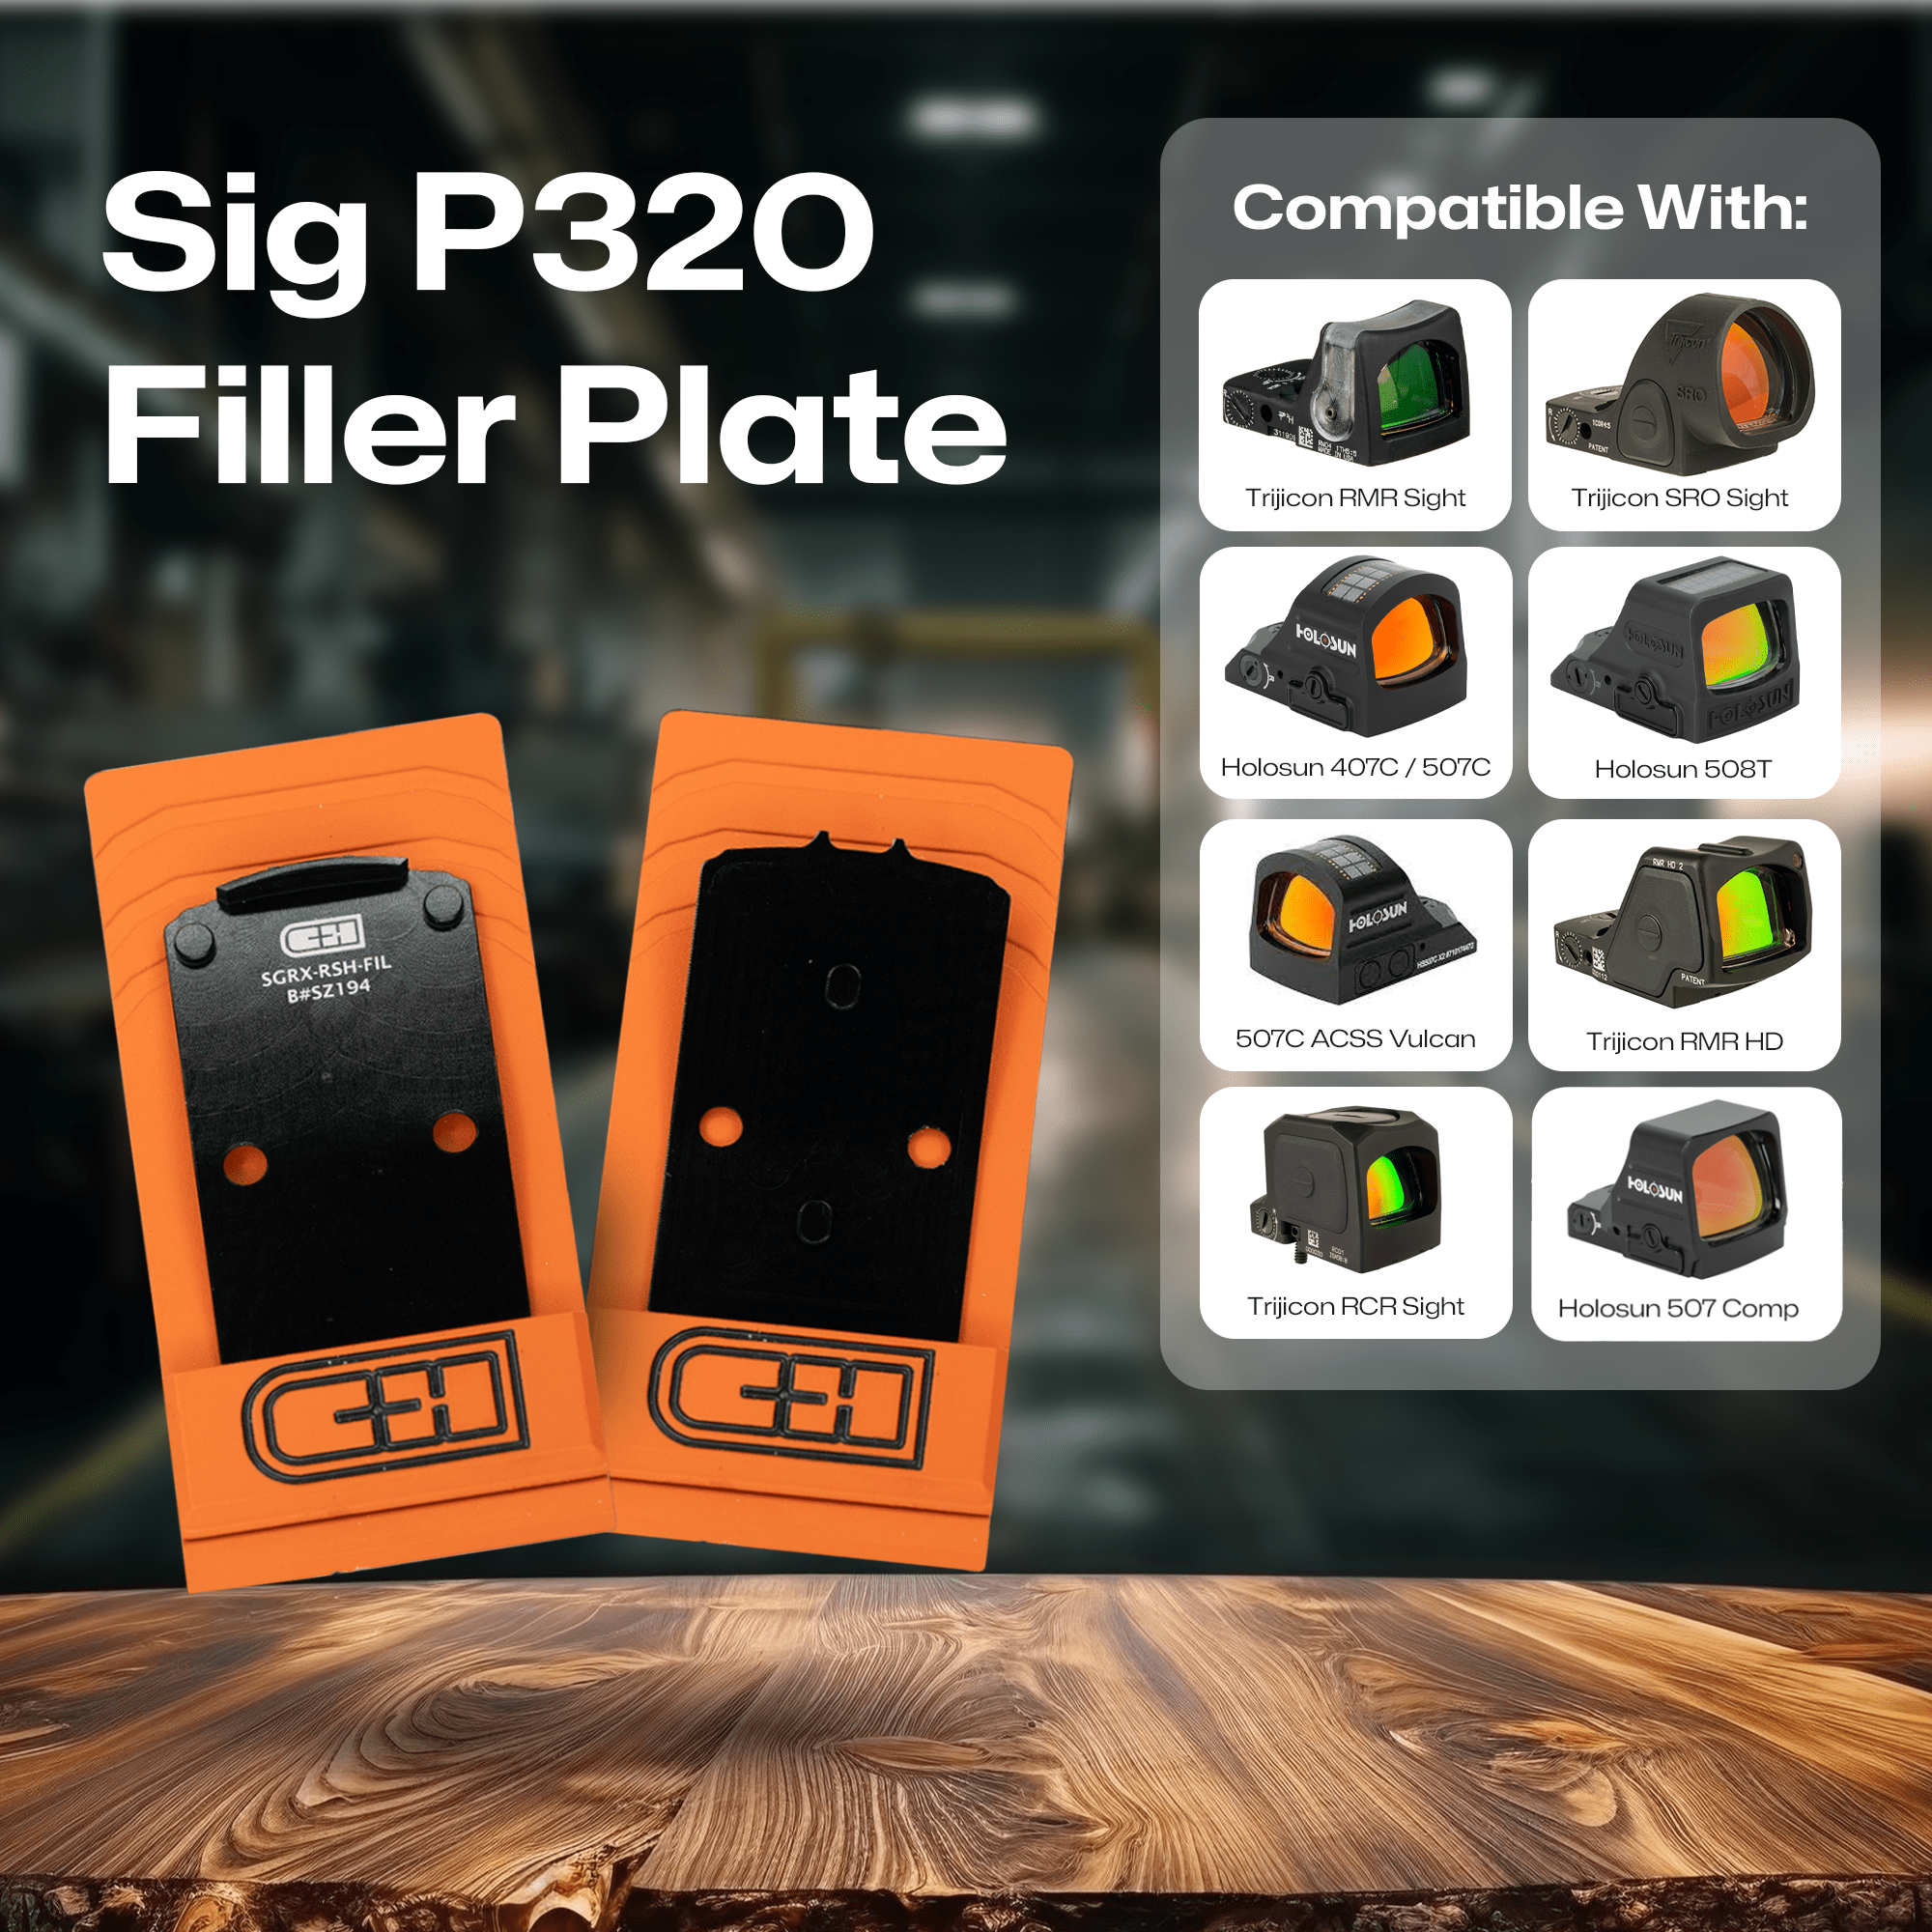 Sig P320 Filler Plate for Romeo 1 Pro Slides that have RMR Holes and have Rear Dovetail Sights Attached to slide - SGRX-RSH-FIL